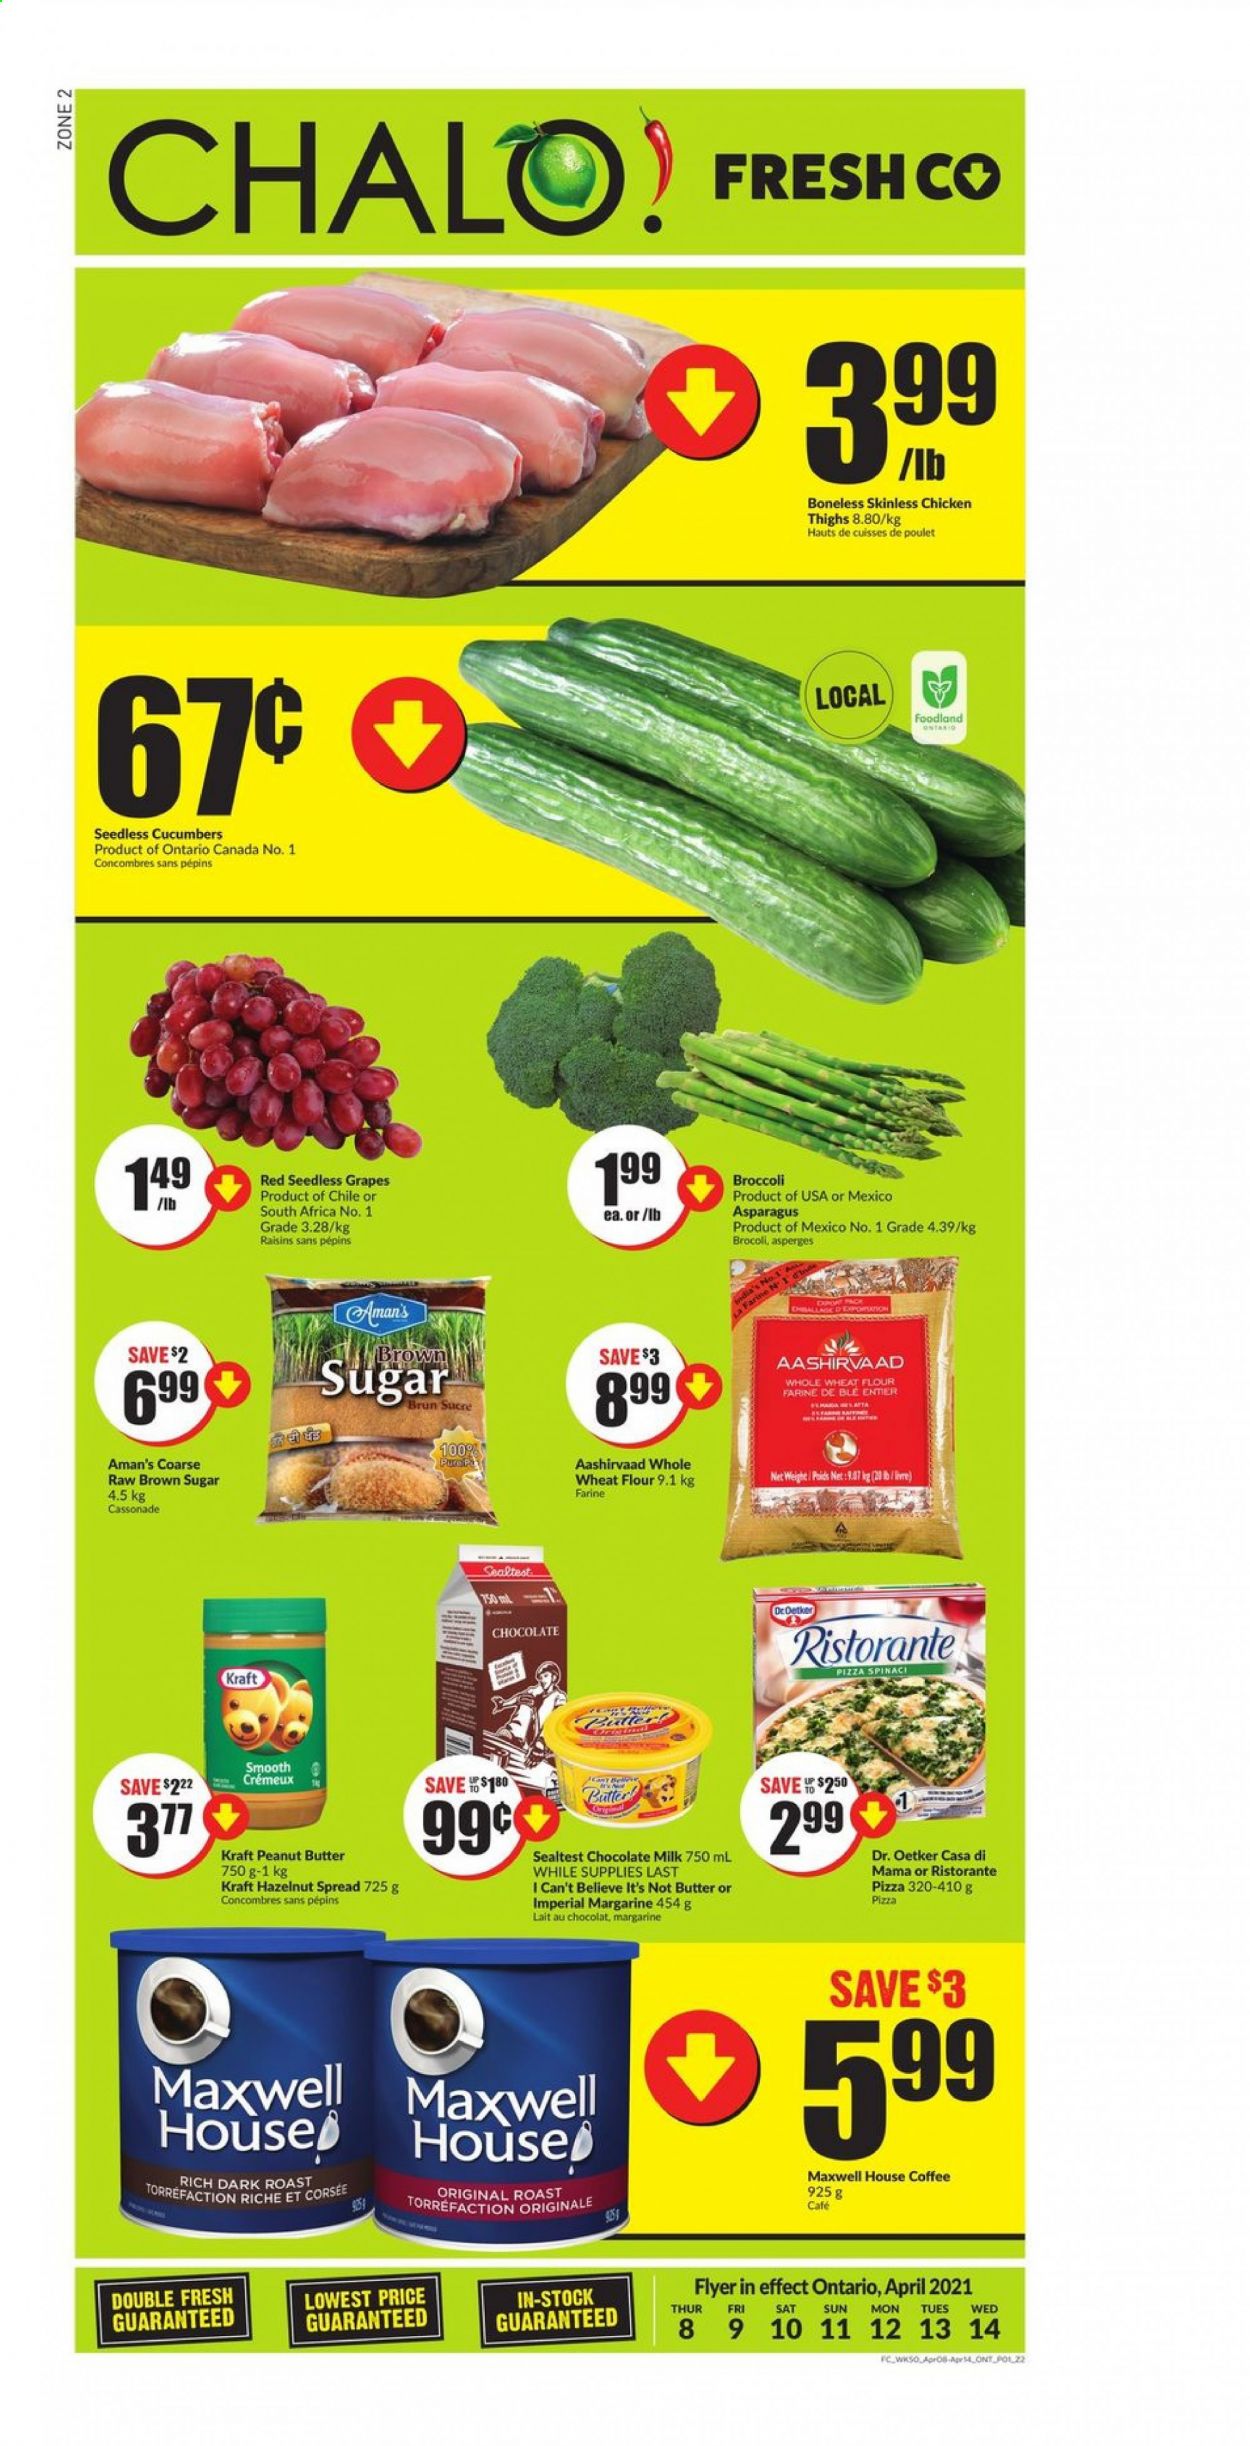 thumbnail - Chalo! FreshCo. Flyer - April 08, 2021 - April 14, 2021 - Sales products - asparagus, broccoli, cucumber, grapes, seedless grapes, pizza, Kraft®, Dr. Oetker, milk, margarine, I Can't Believe It's Not Butter, milk chocolate, chocolate, cane sugar, flour, wheat flour, whole wheat flour, Aashirvaad, peanut butter, hazelnut spread, dried fruit, Maxwell House, coffee, chicken thighs, chicken, raisins. Page 1.